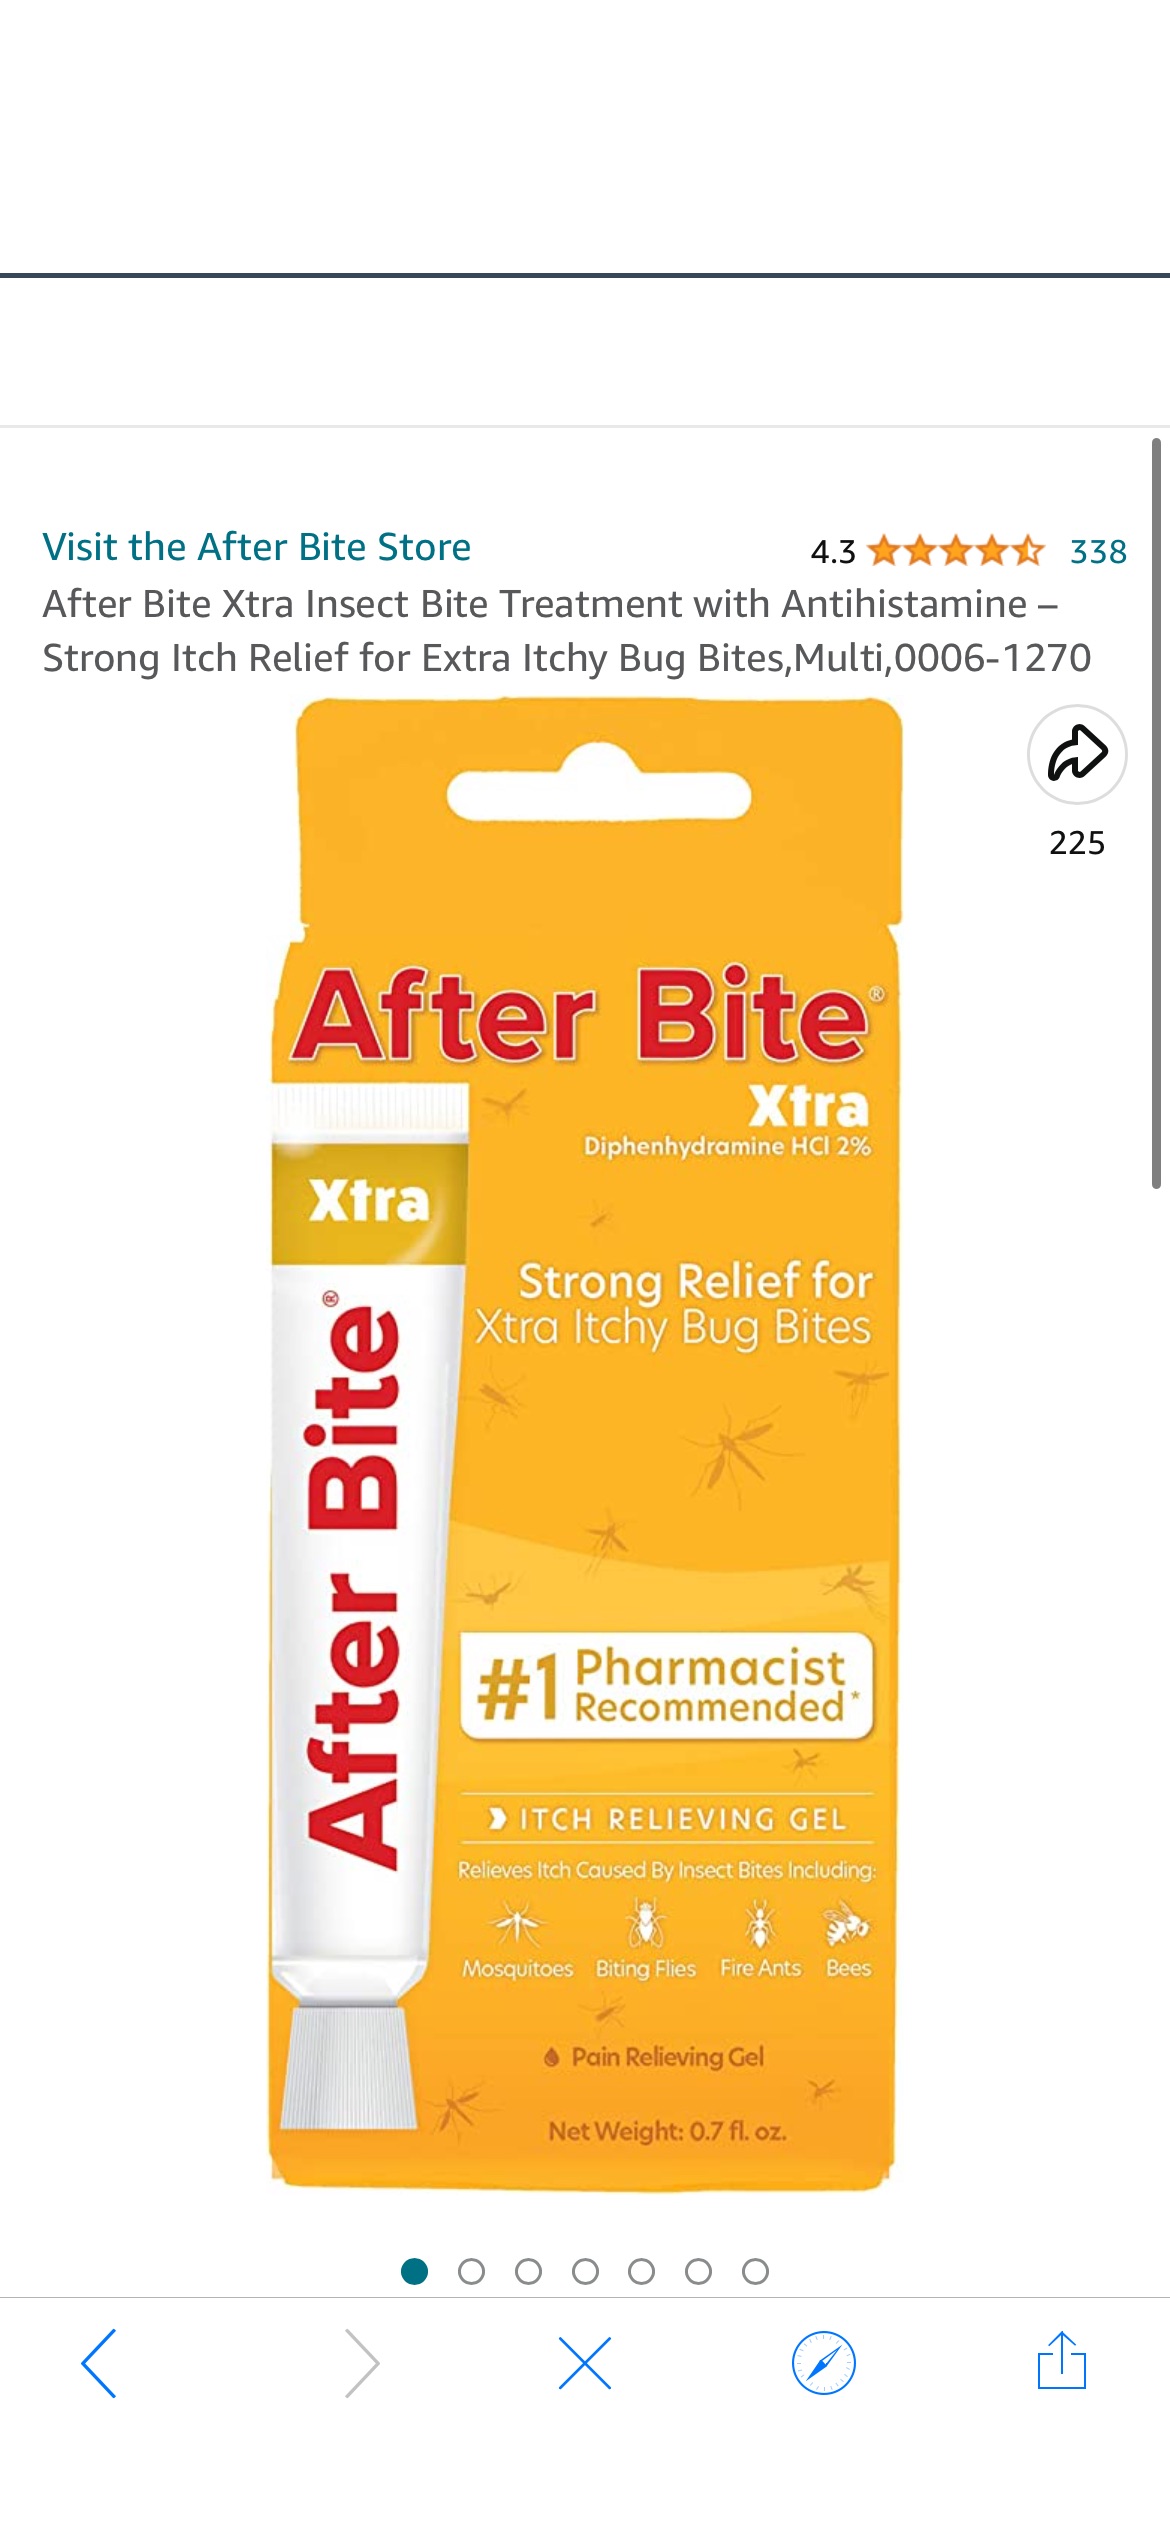 Amazon.com: After Bite Xtra Insect Bite Treatment with Antihistamine – Strong Itch Relief for Extra Itchy Bug Bites,Multi,0006-1270 : Health & Household